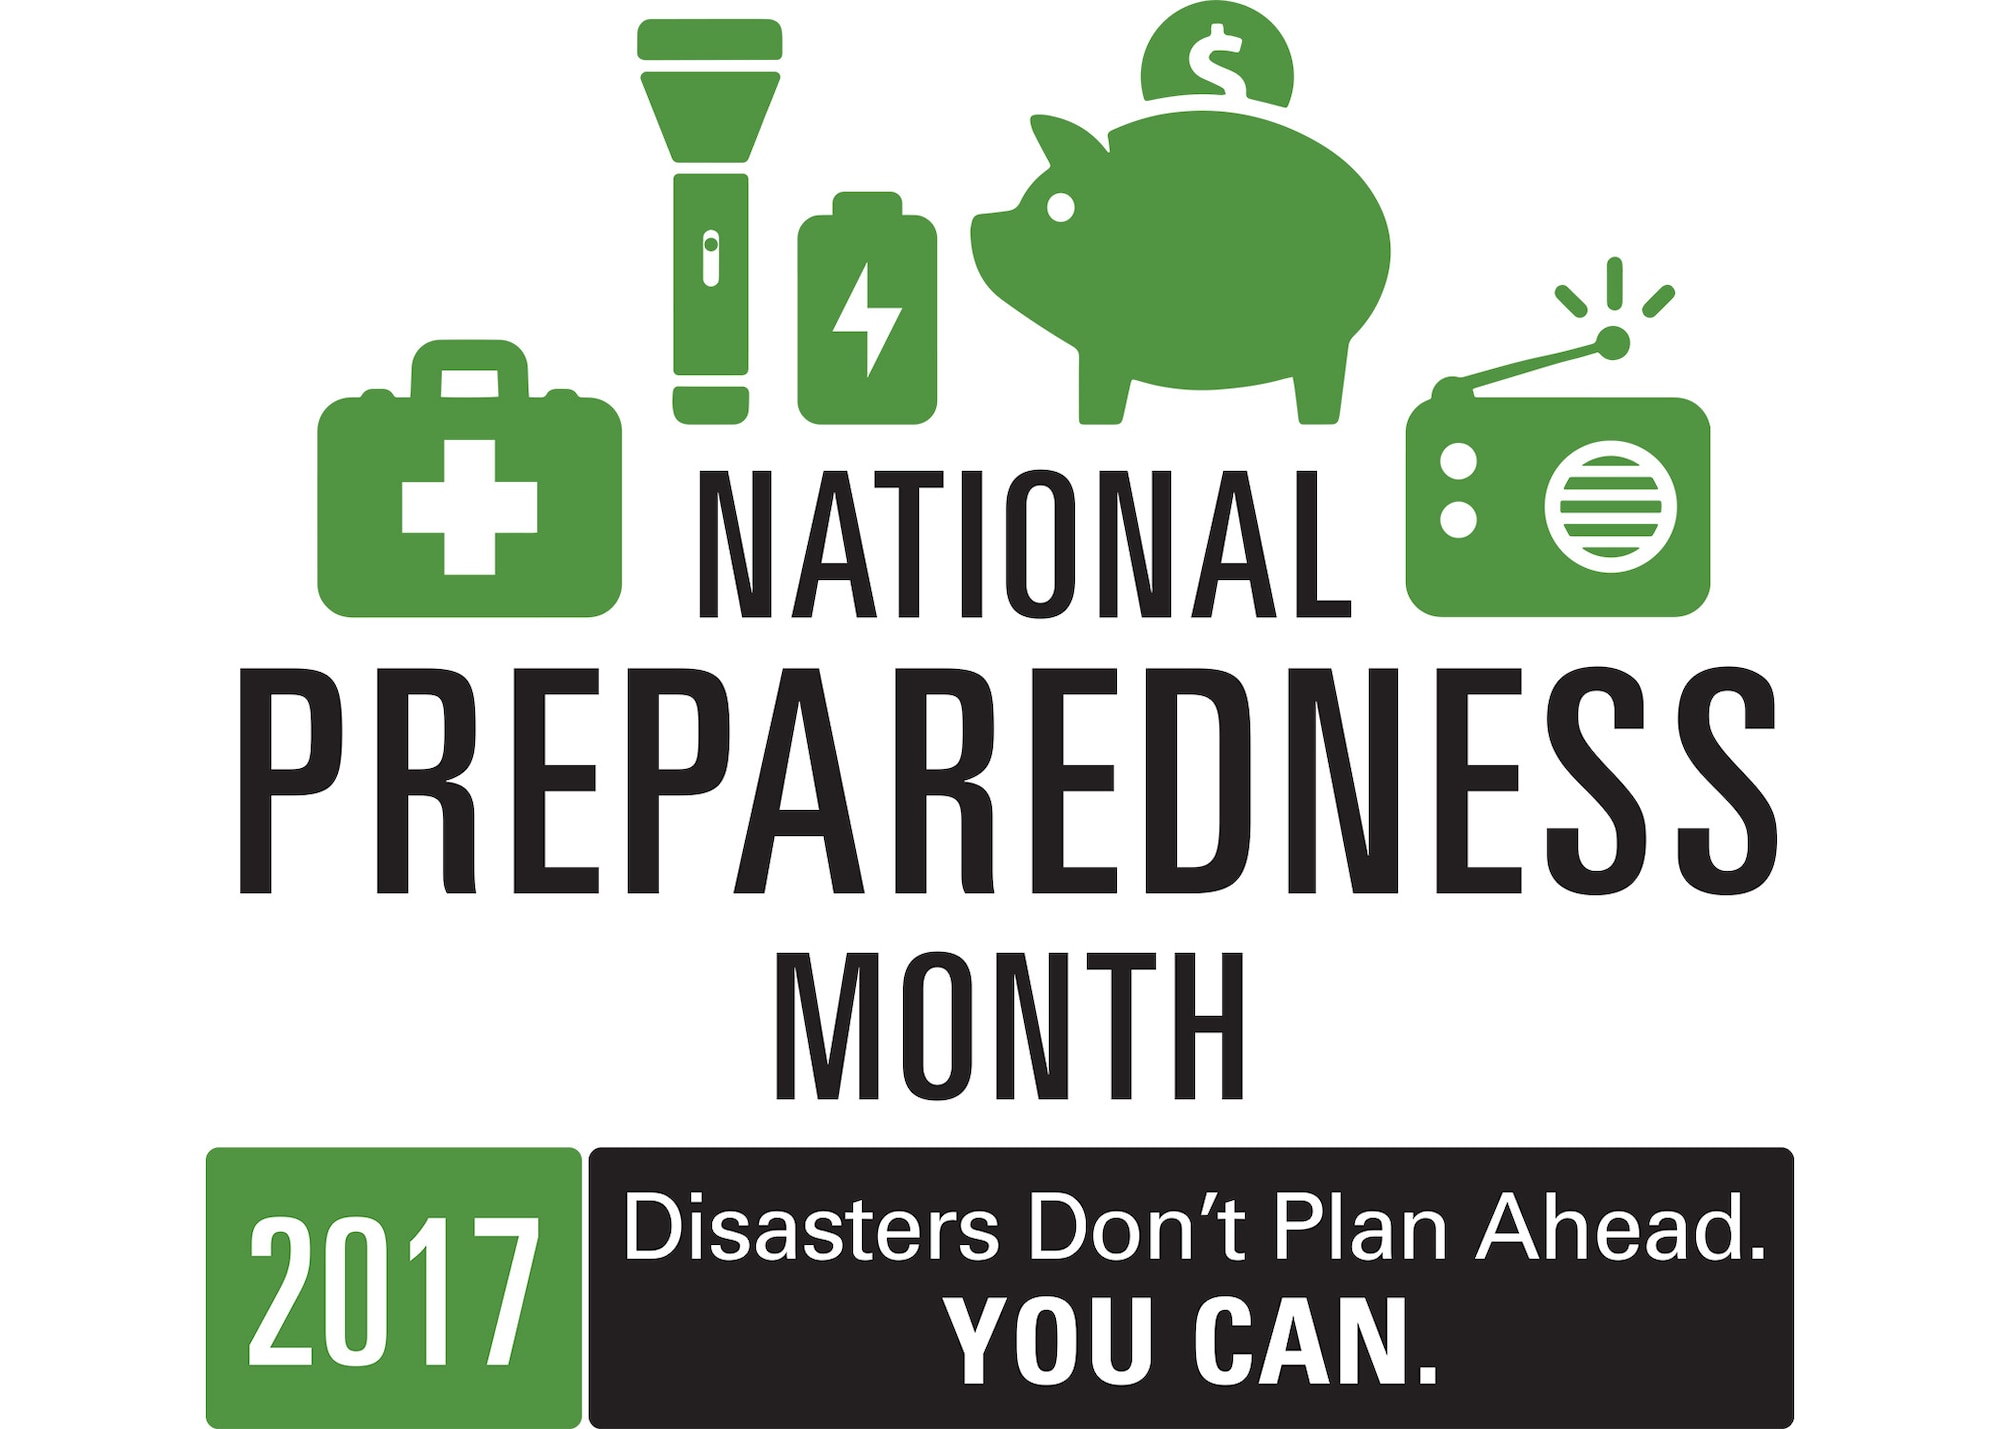 The official logo for National Preparedness Month 2017